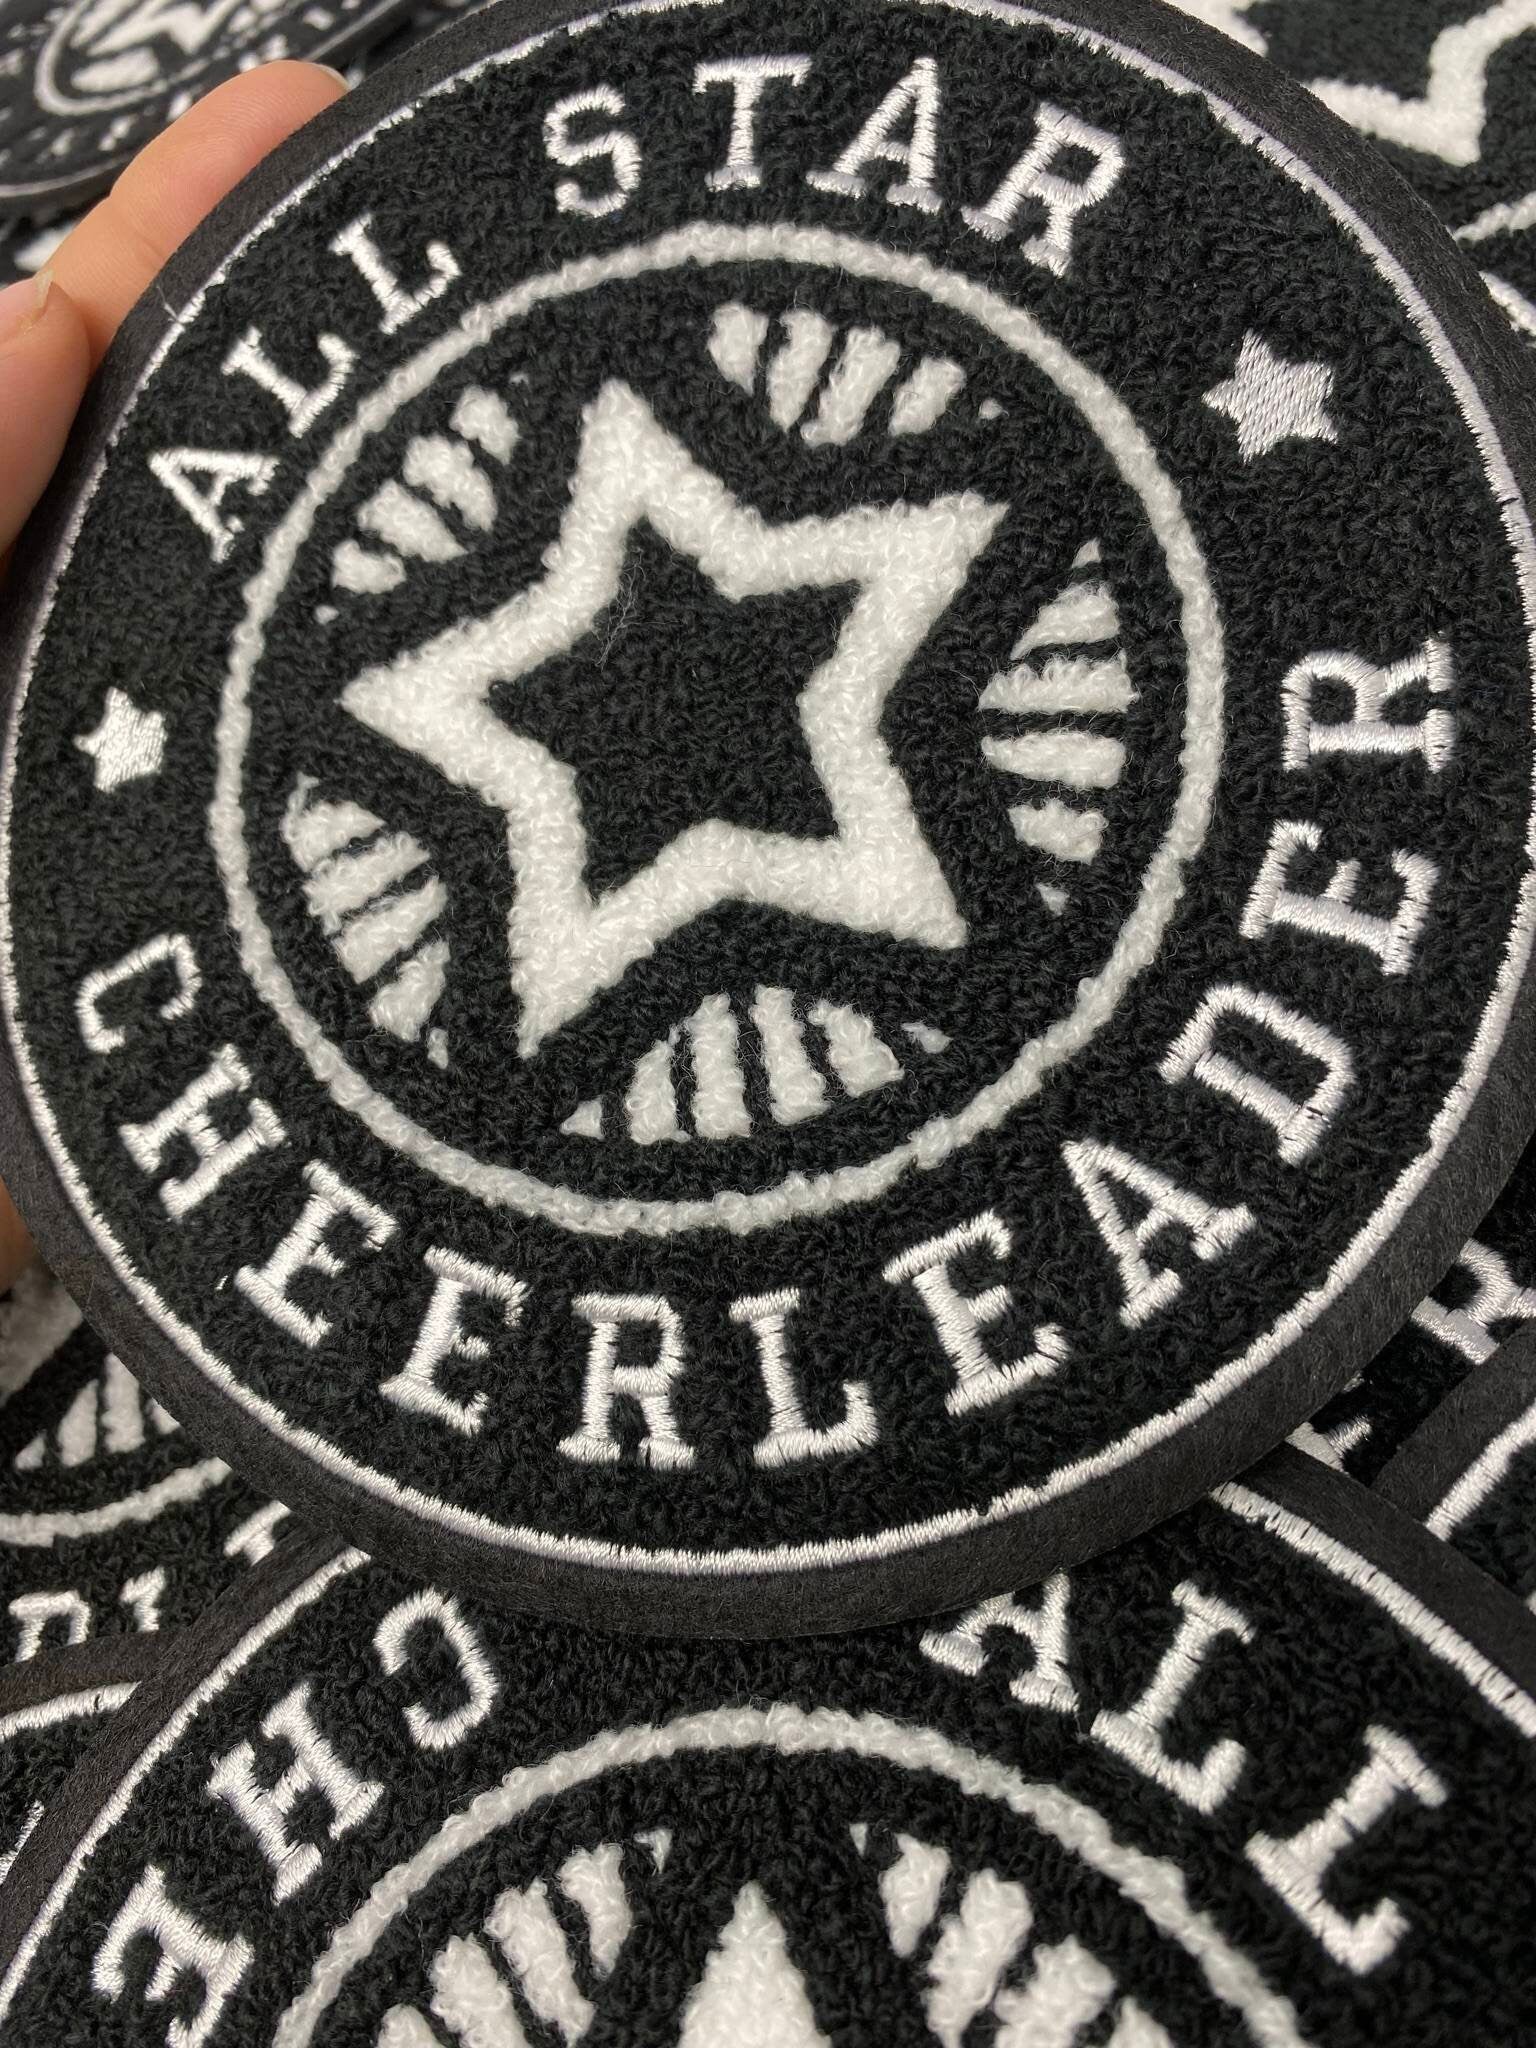 3x Black Star Patches Iron on Patch Iron on Black Star Patches White Star  Iron on Patch Patches for Jackets Iron on Patches 